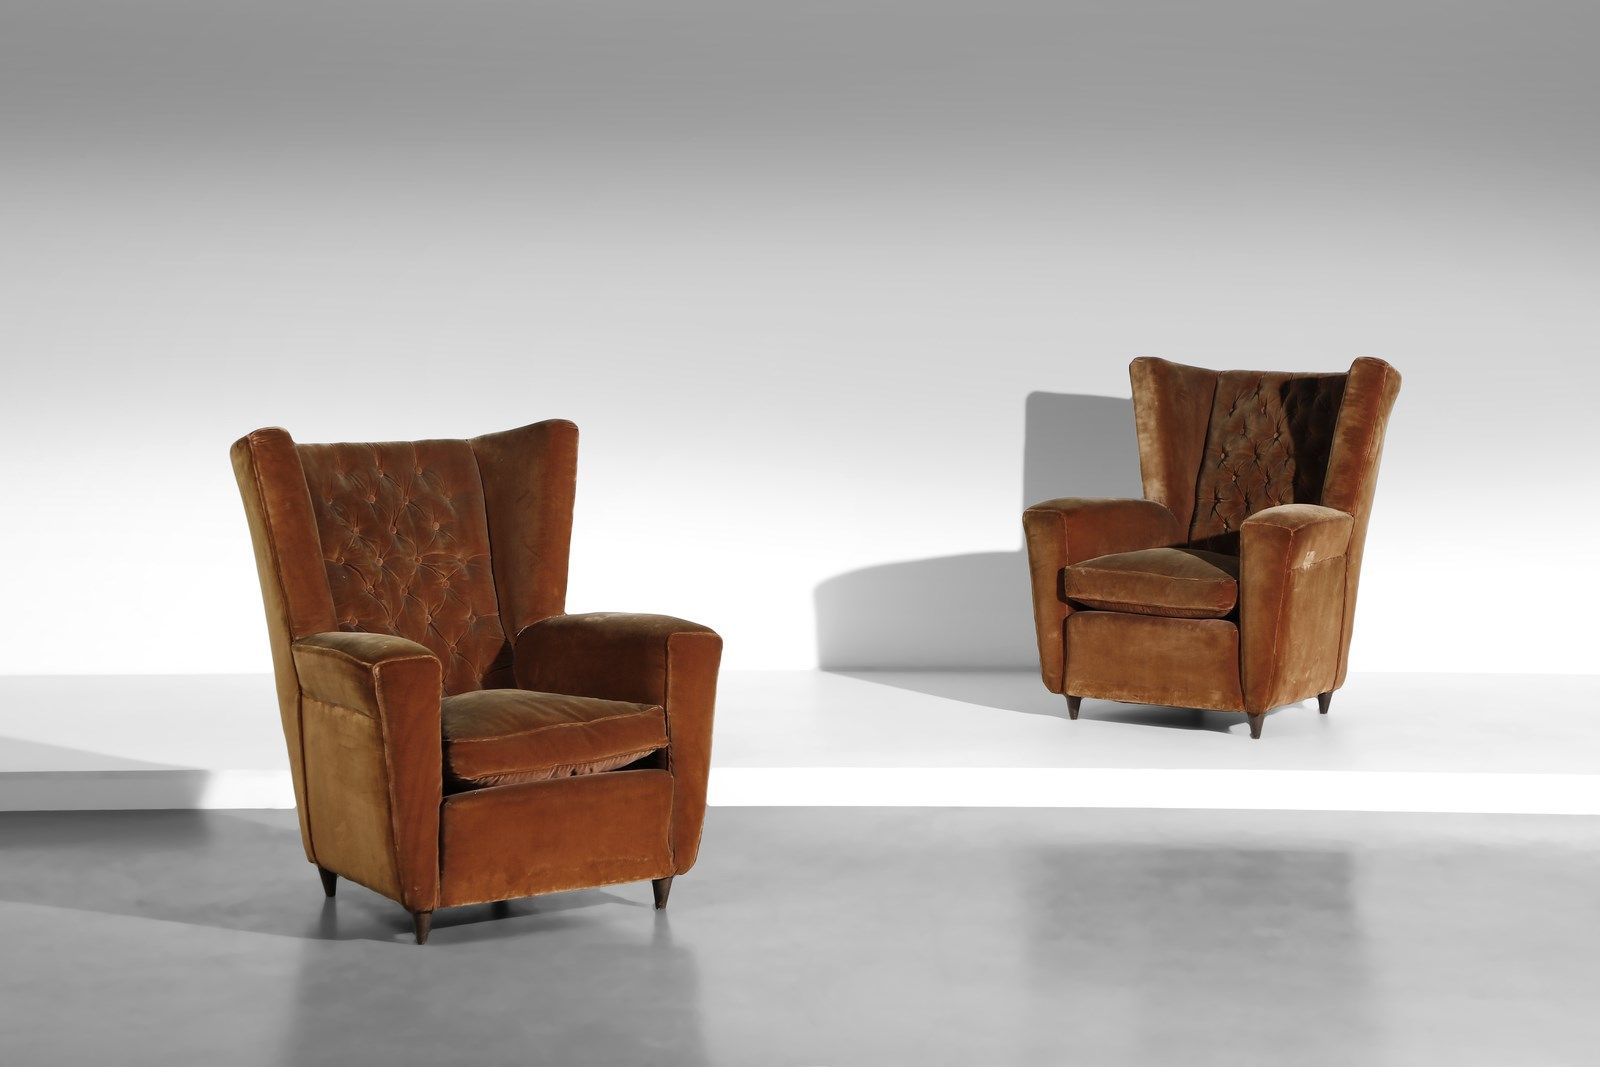 BUFFA PAOLO (1903 - 1970) PAOLO attributed. Pair of armchairs. Wood and padded v&hellip;